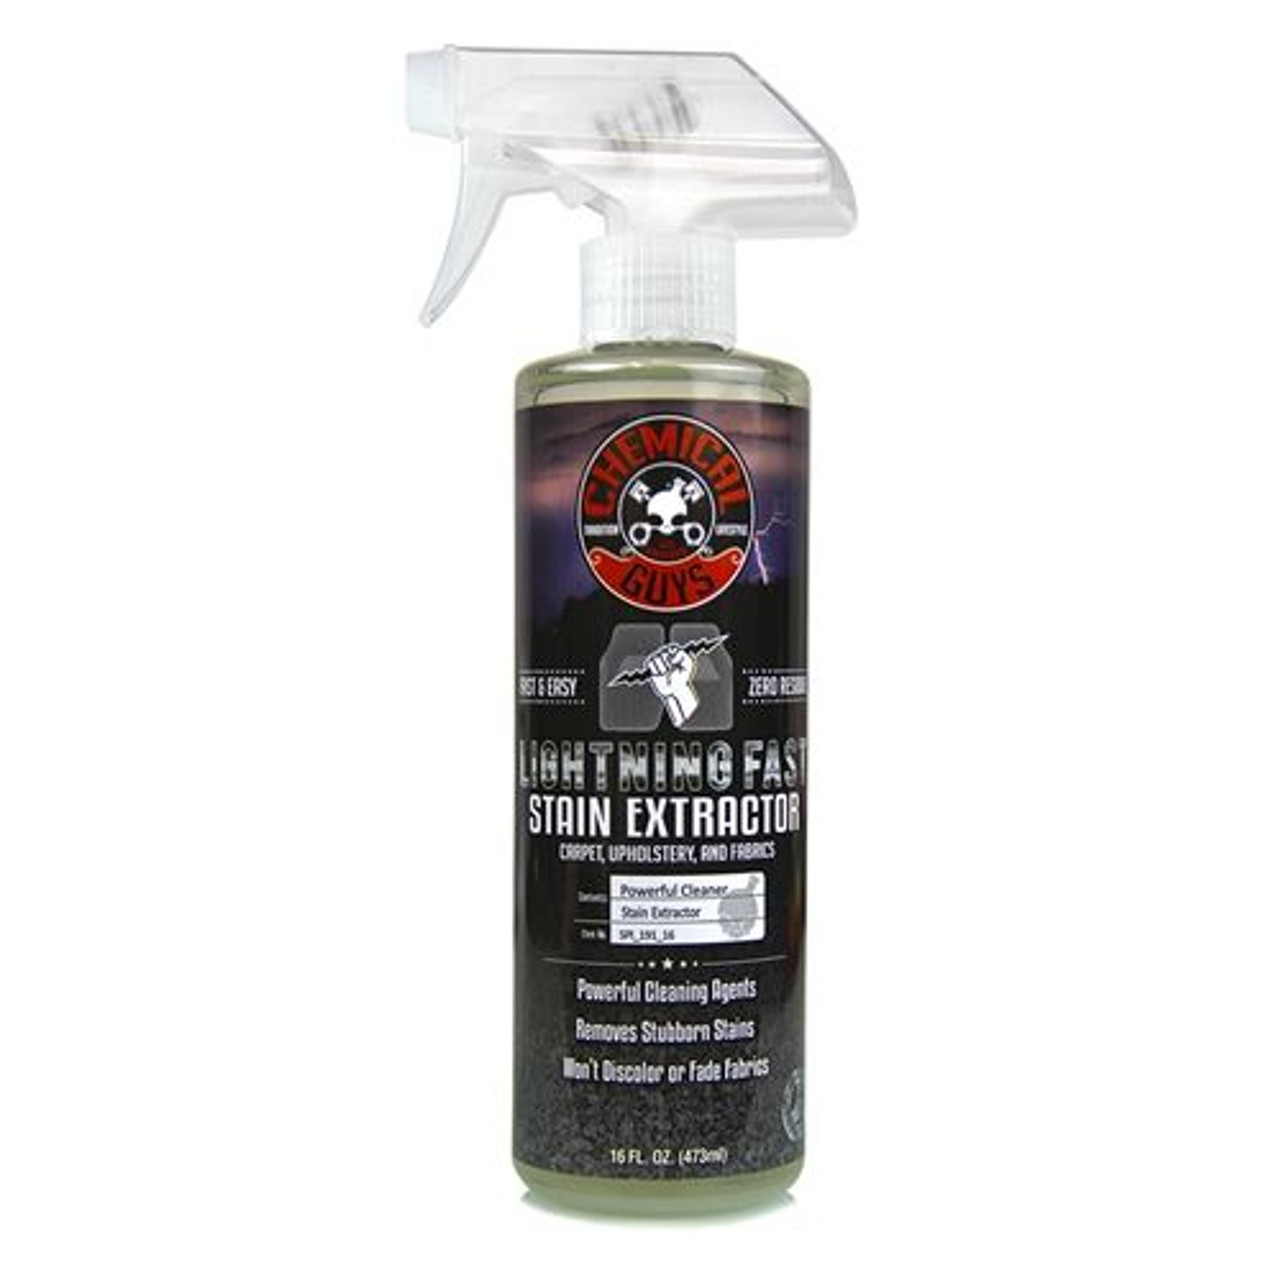 Chemical Guys Stain Extractor, Lightning Fast - 16 fl oz